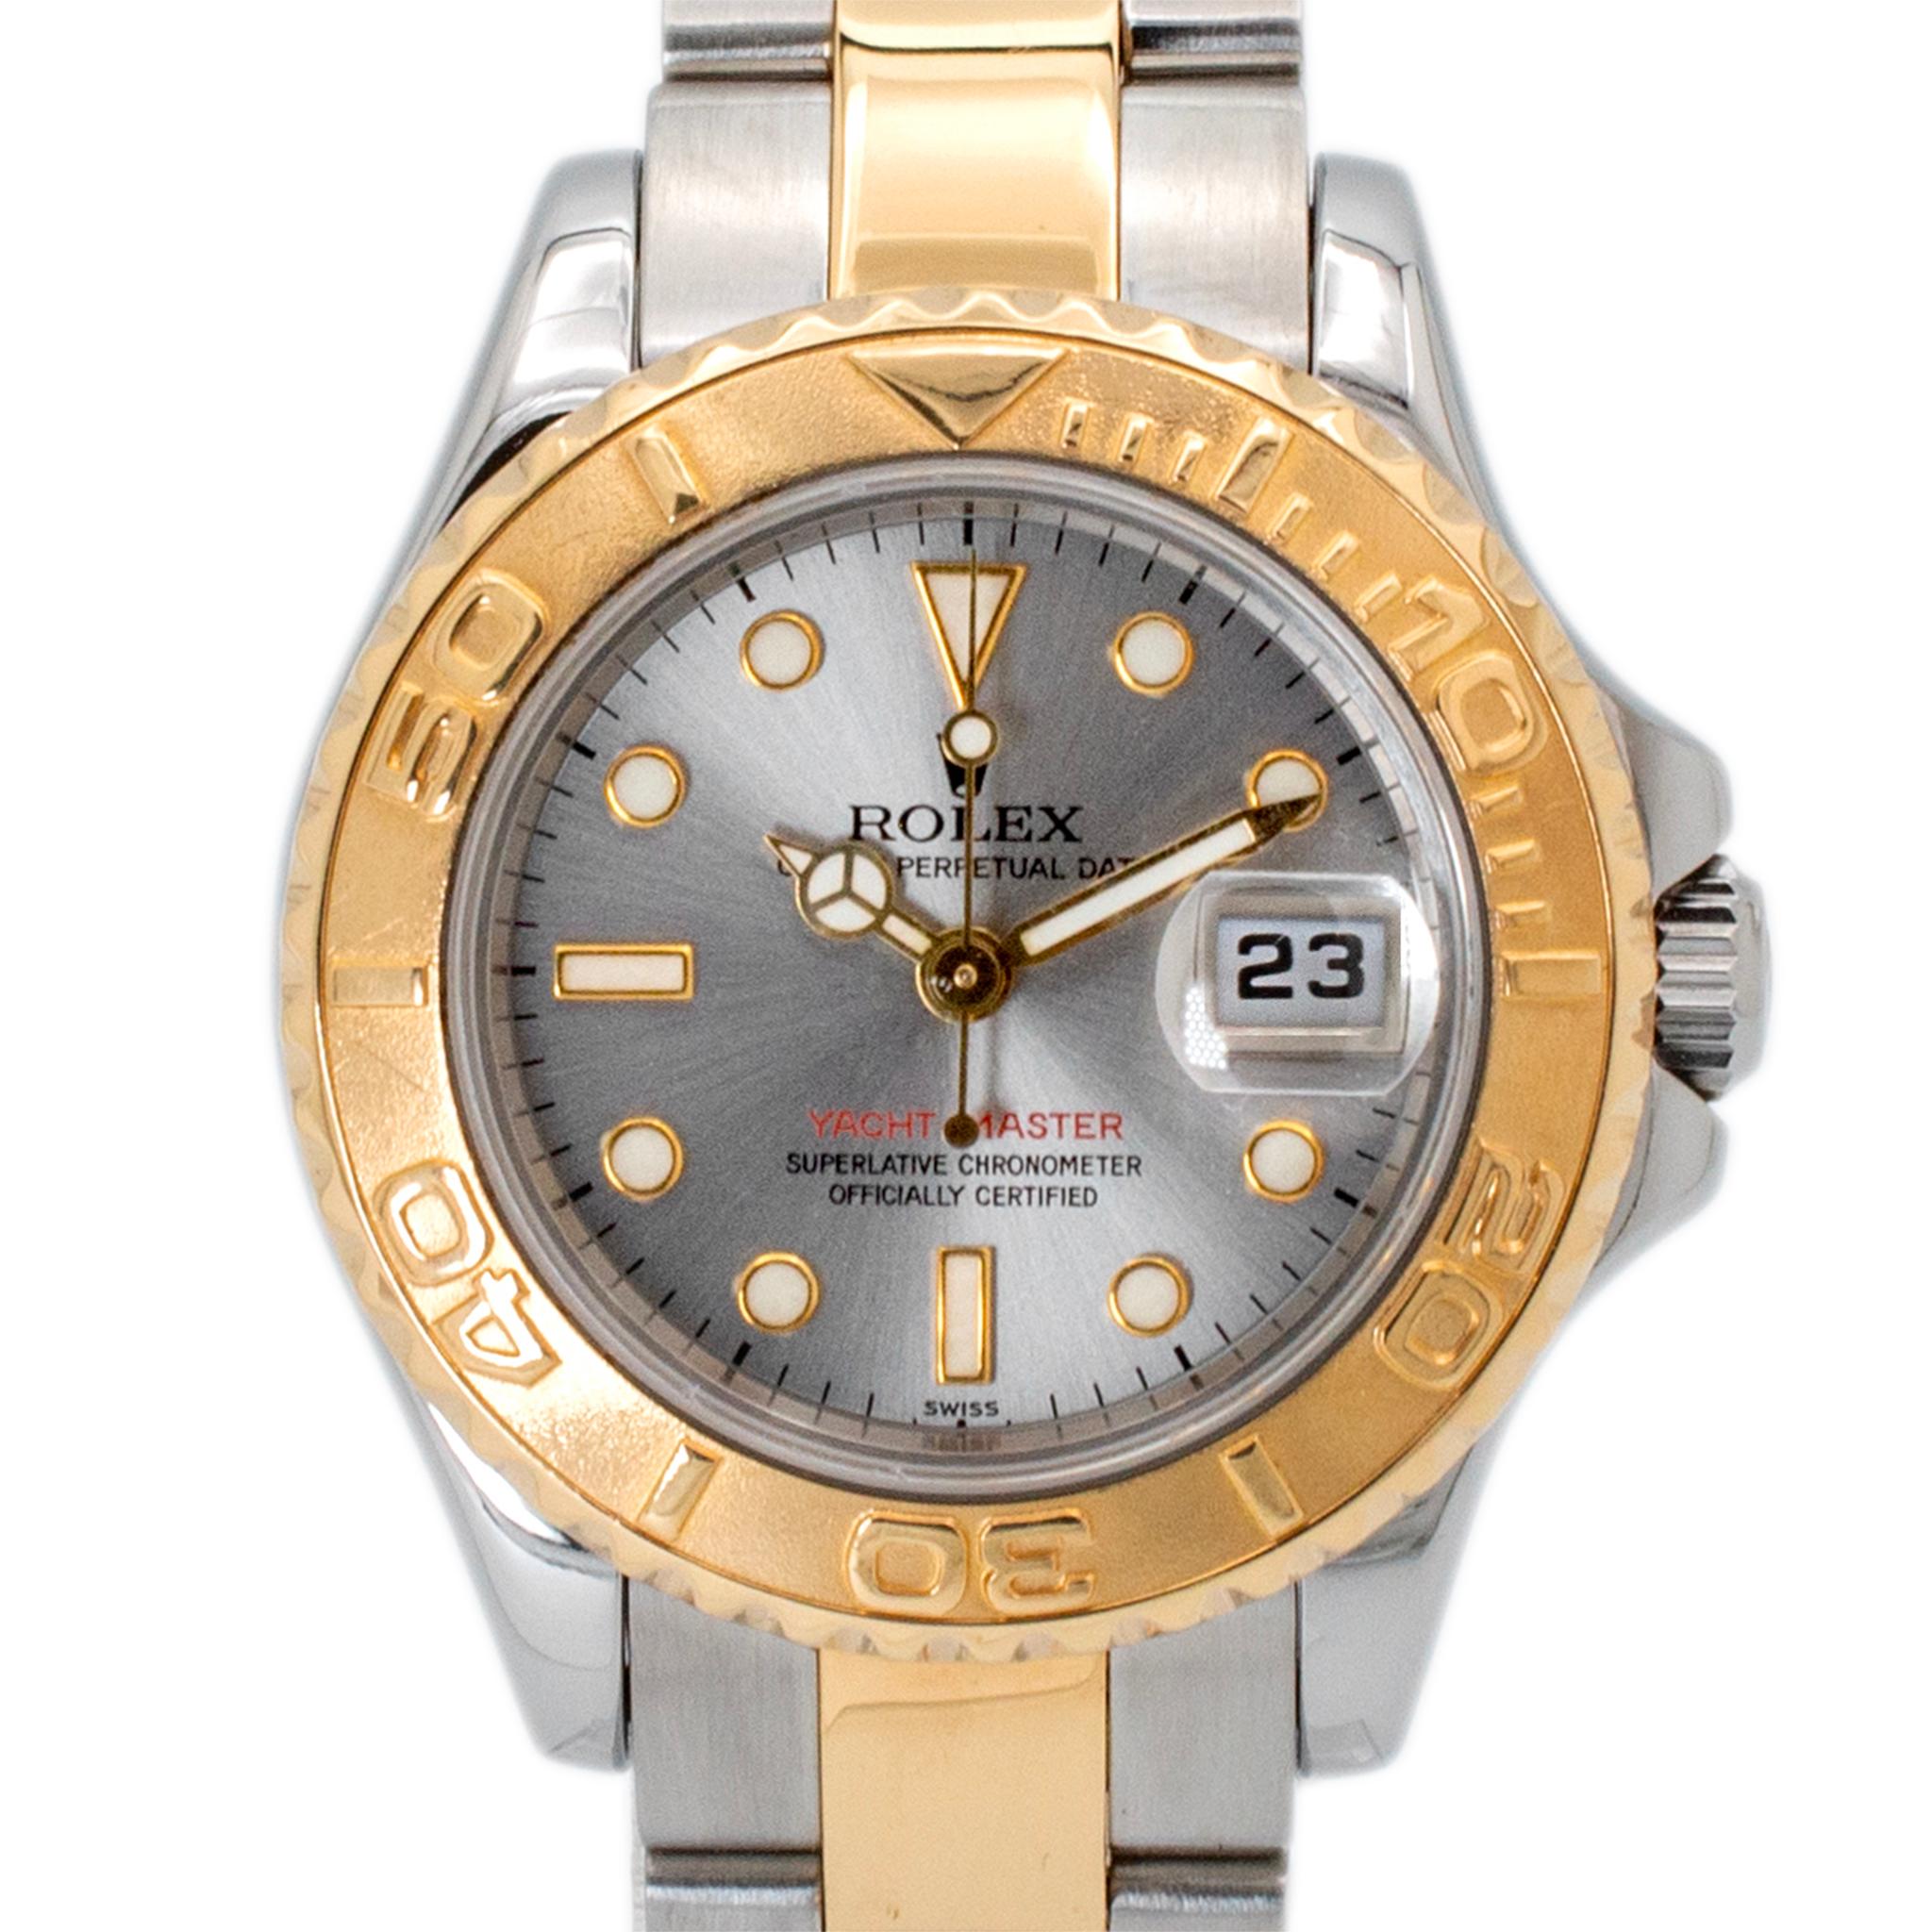 Brand: Rolex

Gender: Ladies

Metal Type: 18K Yellow Gold & Stainless Steel

Diameter: 29.00 mm

Weight: 72.30 Grams

Ladies 18K yellow gold and stainless steel ROLEX Swiss made watch. The metals were tested and determined to be 18K yellow gold and